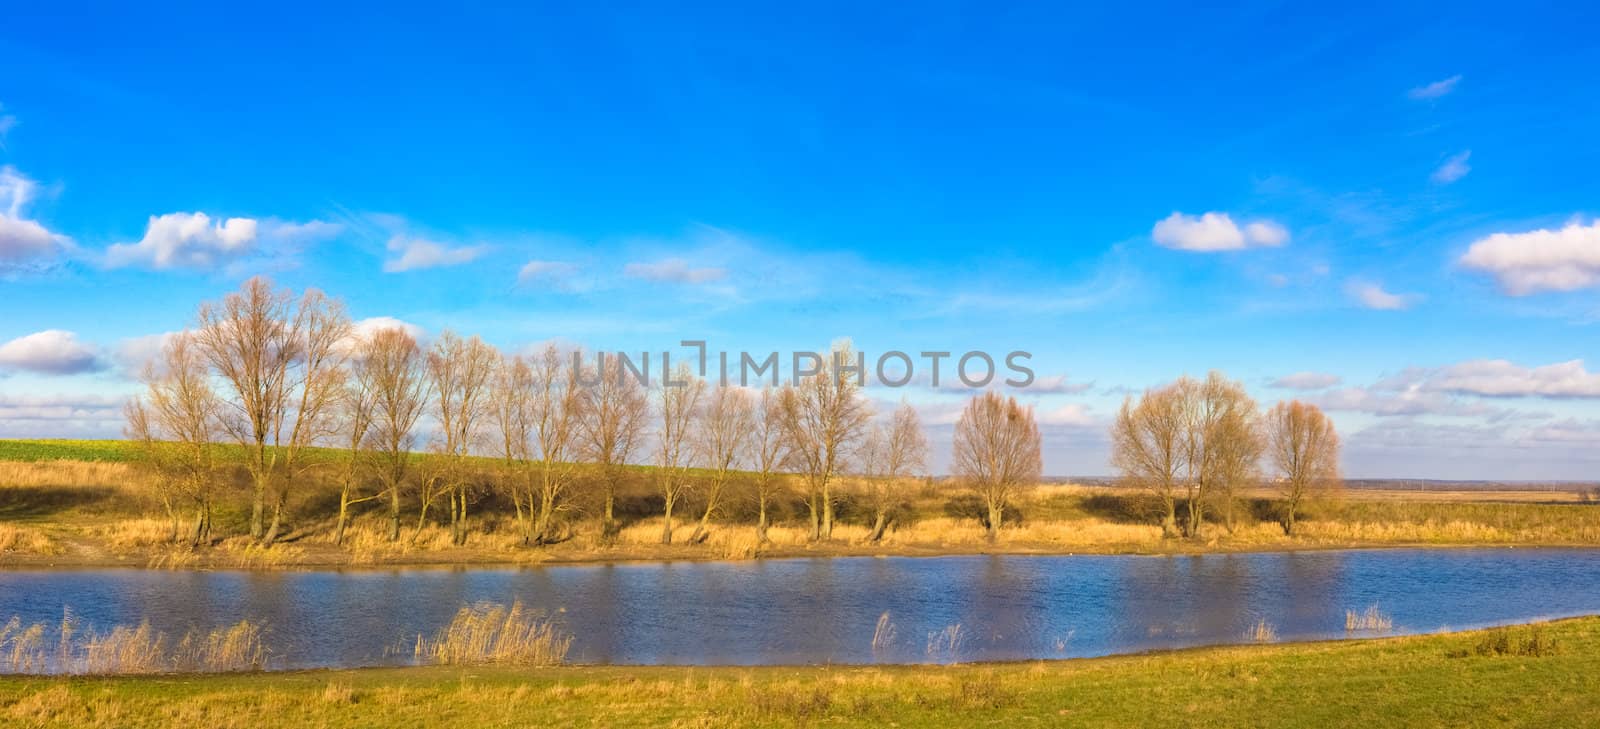 Autumn Landscape Of River And Trees And Bushes